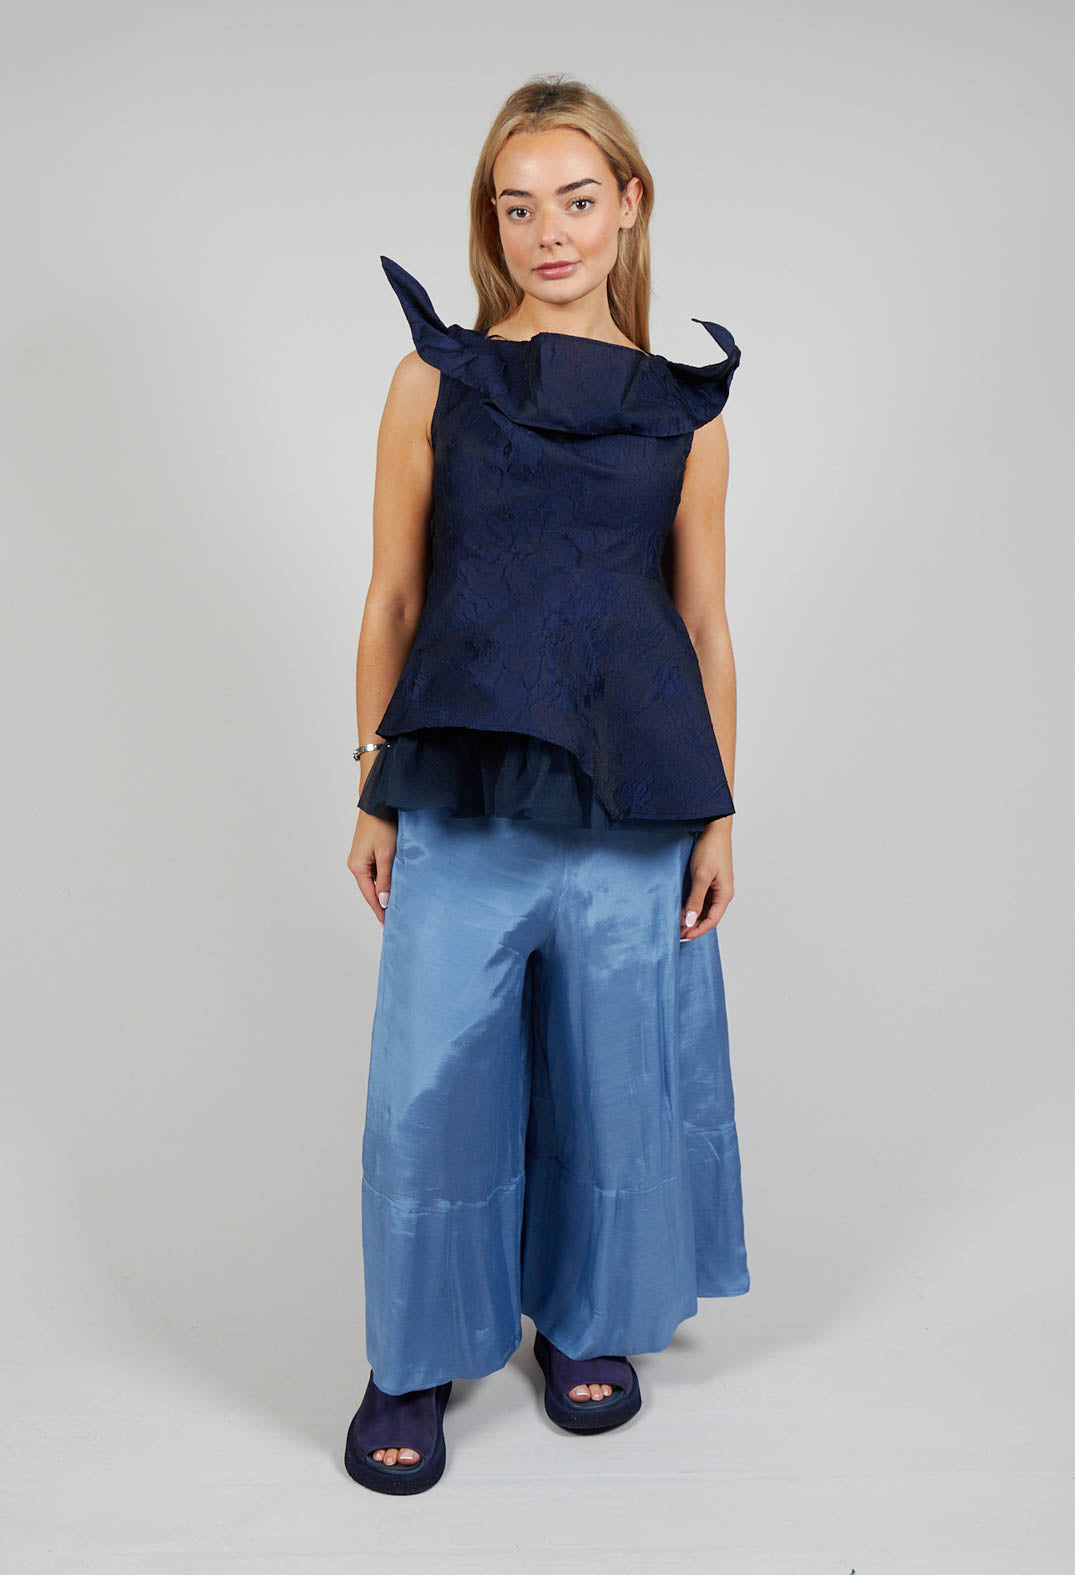 Lace Cowl Neckline Top in Blue